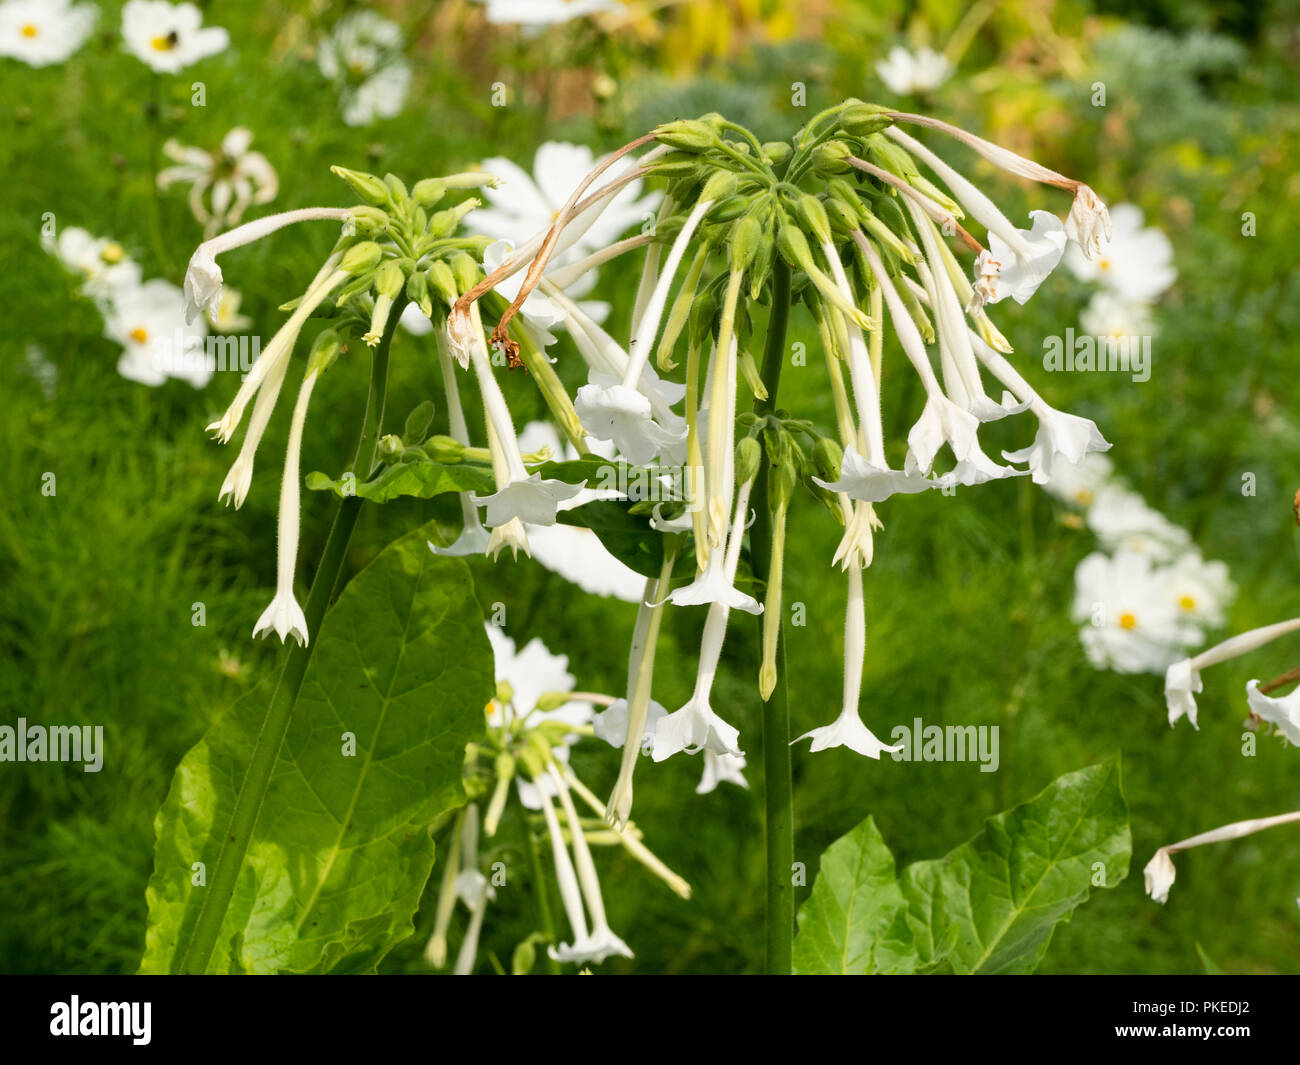 Scented, tubular white flowers of the tender biennial tobacco plant, Nicotiana sylvestris Stock Photo